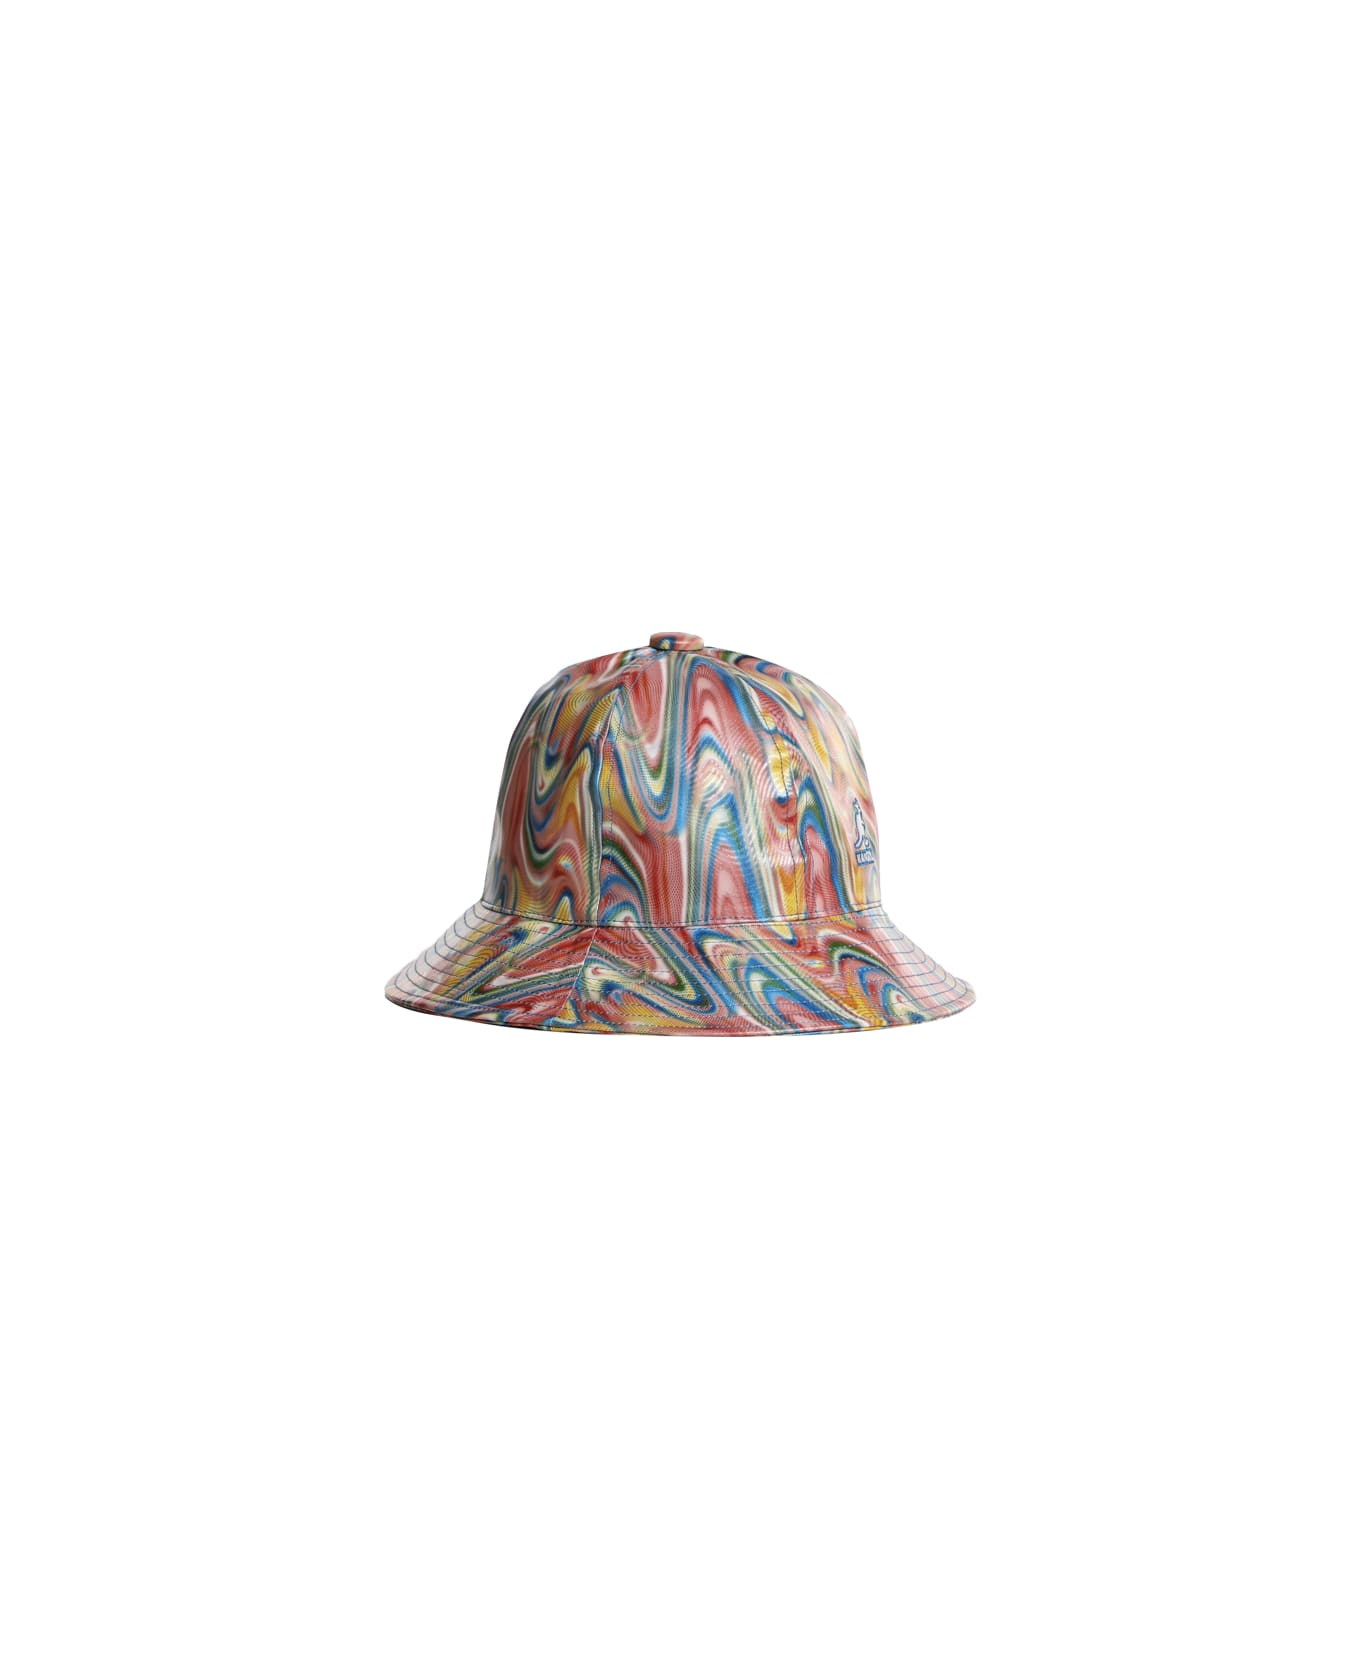 Kangol Heatwave Casual With Psychedelic Print - Pepto rainbow 帽子